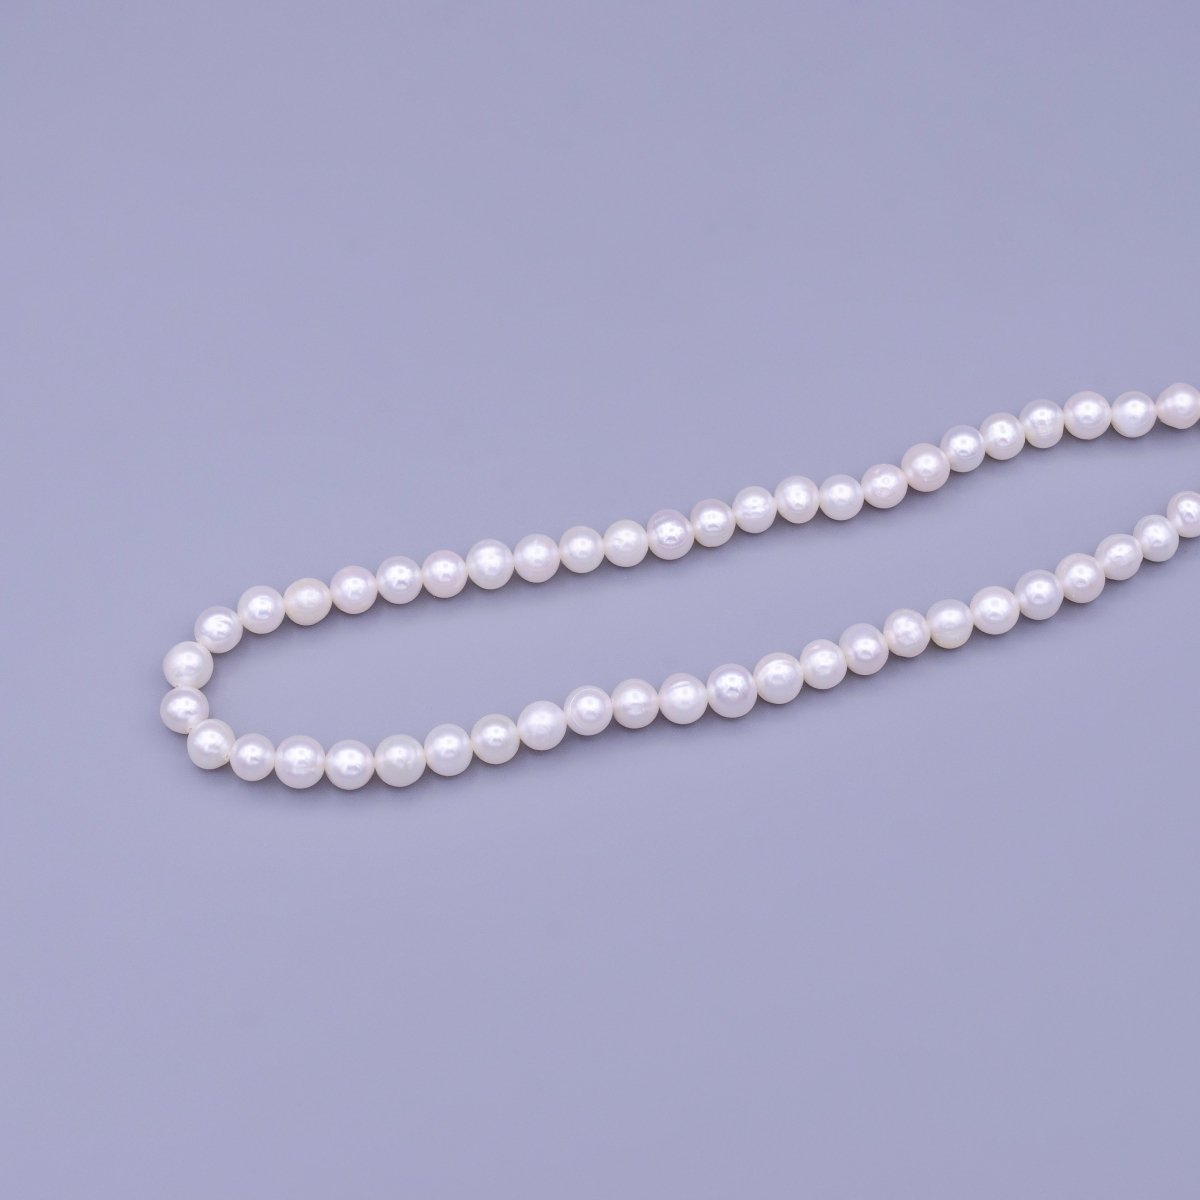 6.5mm Freshwater Pearl Round 60 Pieces/Strand Jewelry Making Findings Supply | WA-1667 - DLUXCA